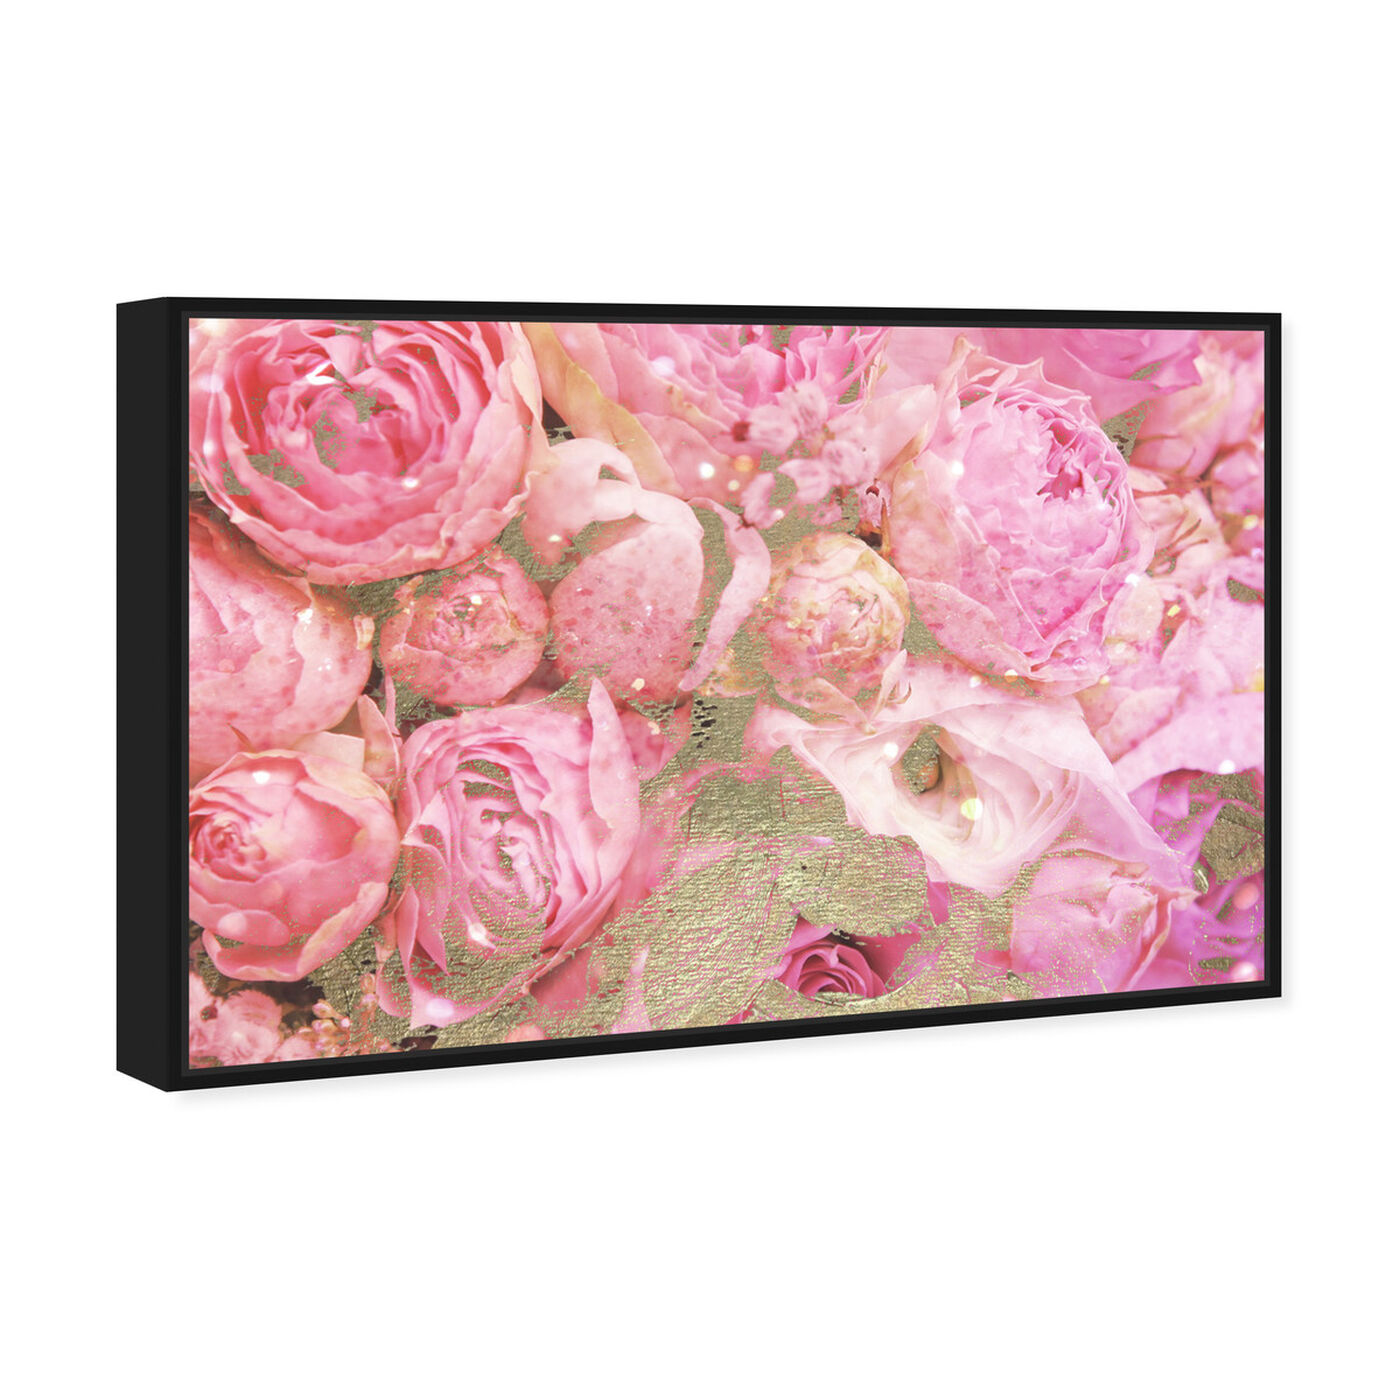 Angled view of Roses in Pink featuring floral and botanical and florals art.